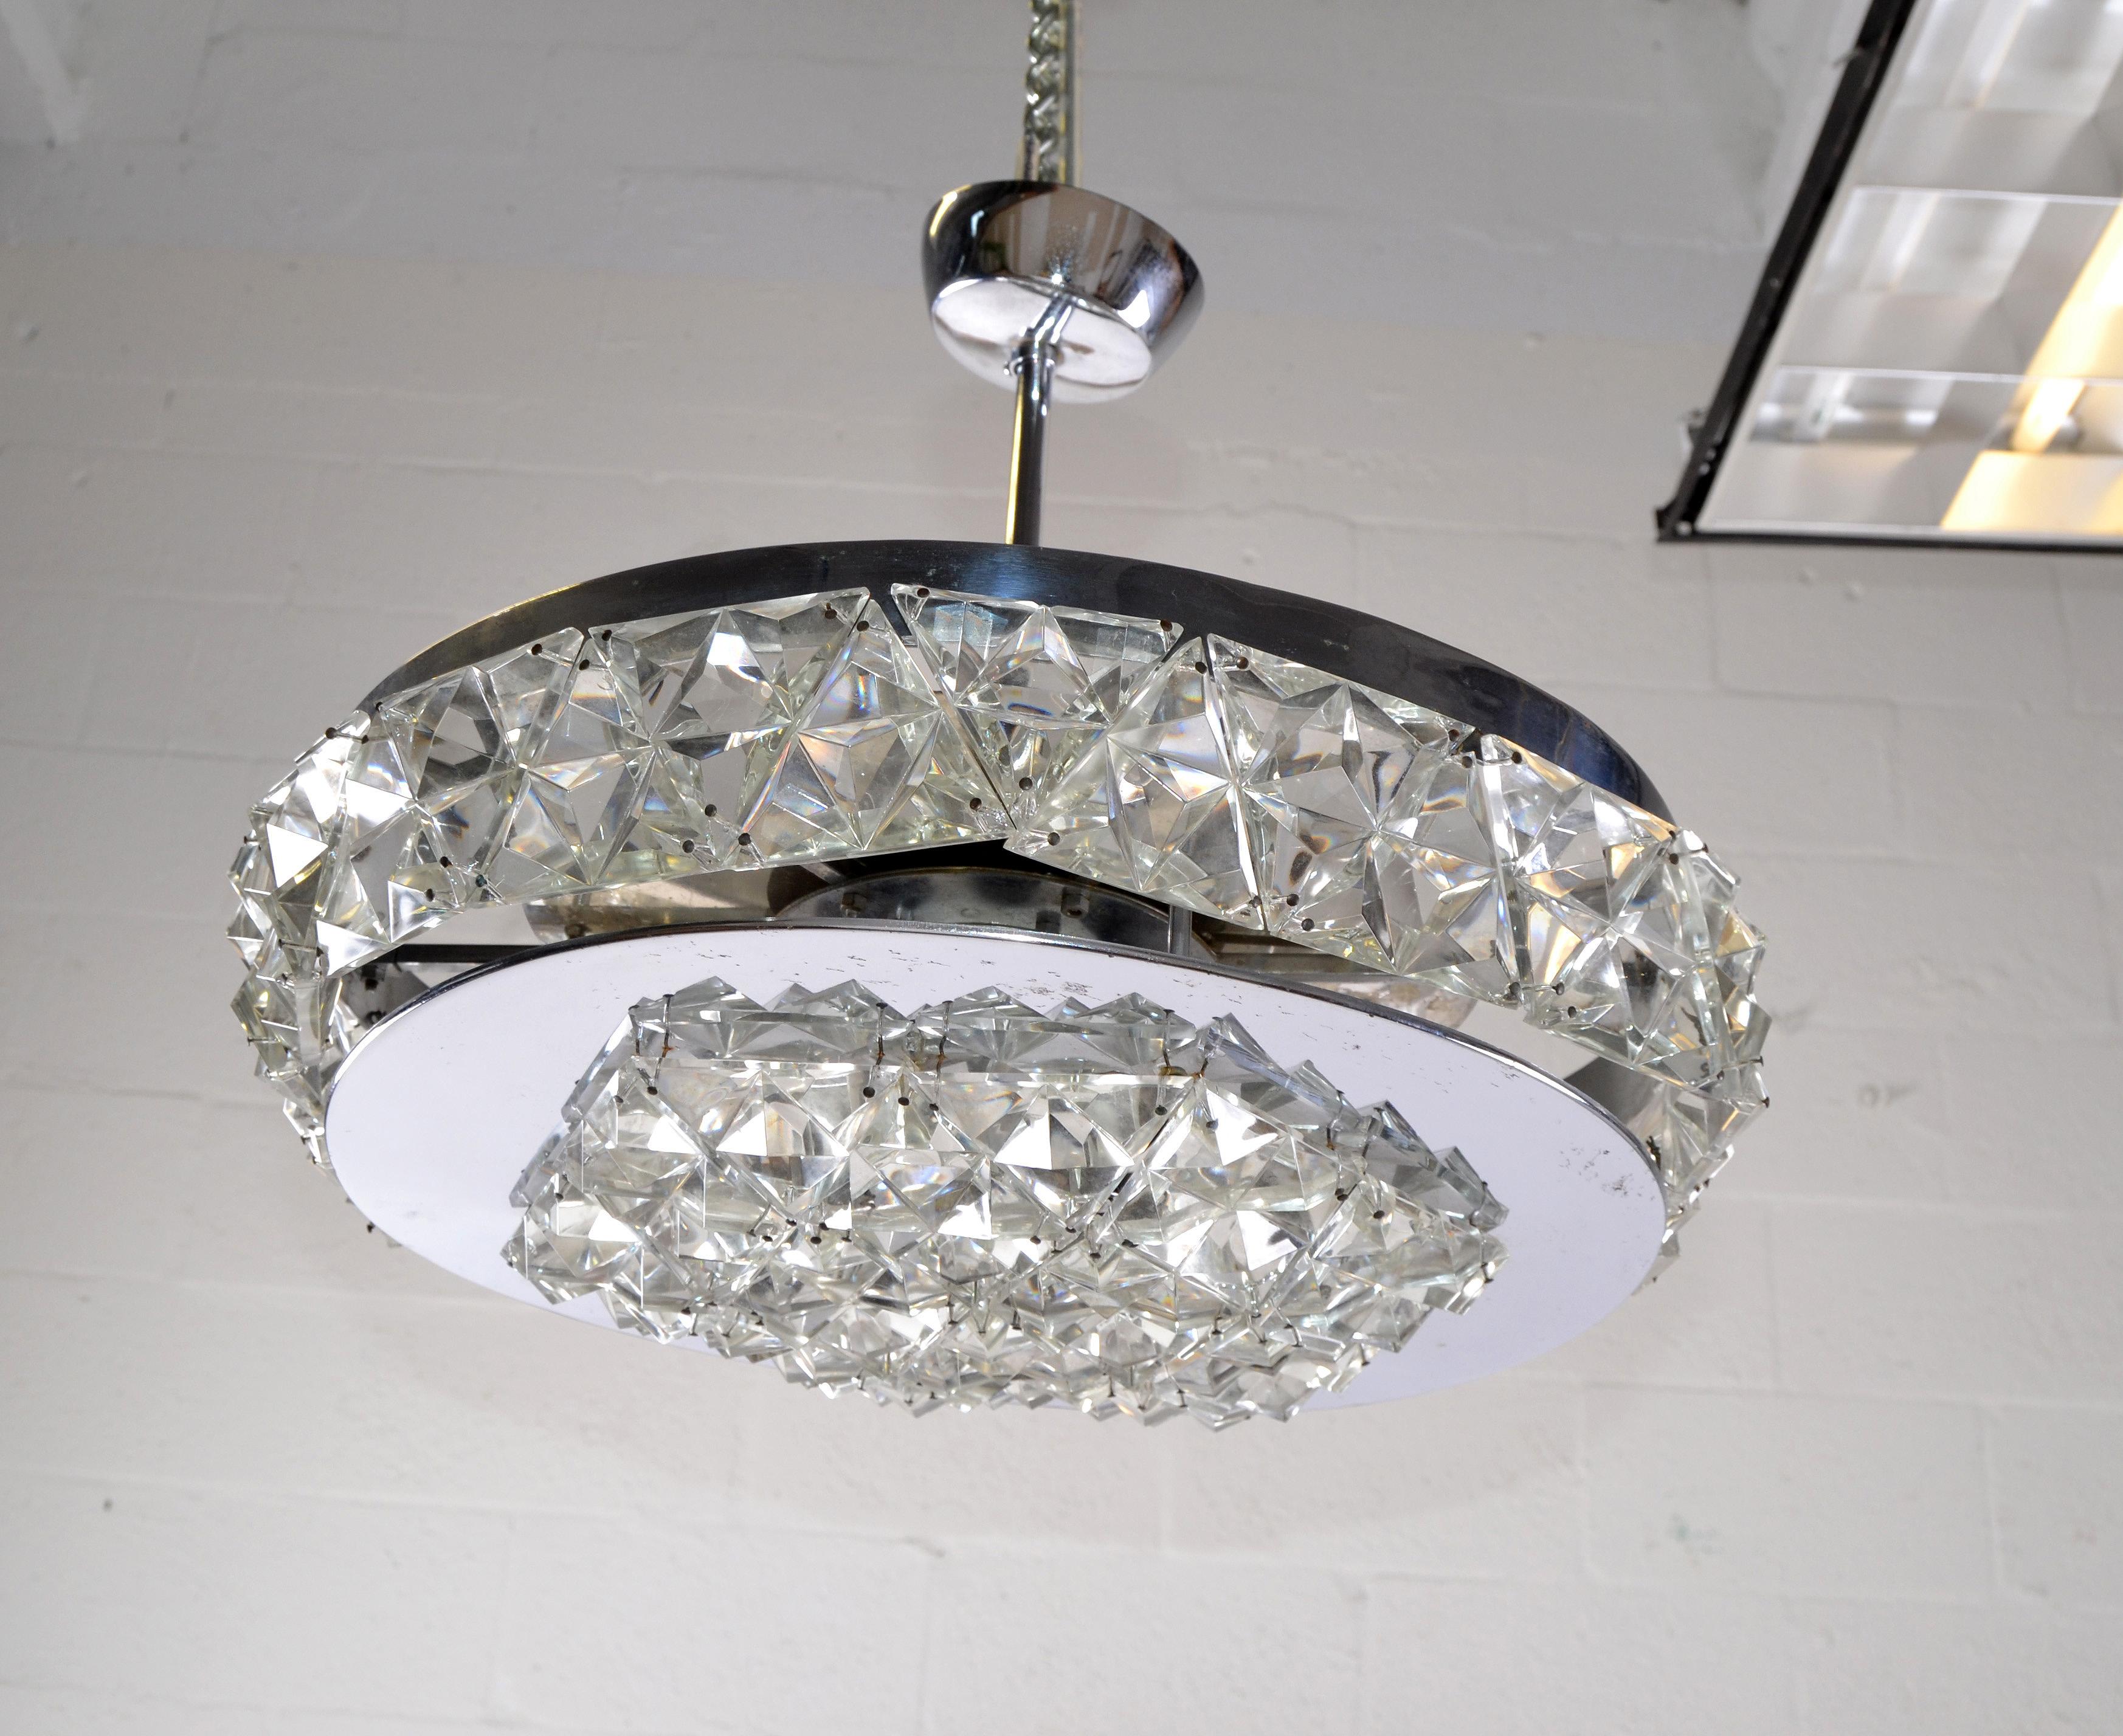 Mid-Century Modern Chrome and Crystal Flushmount Ceiling Light Fixture, 1970s In Good Condition For Sale In Miami, FL